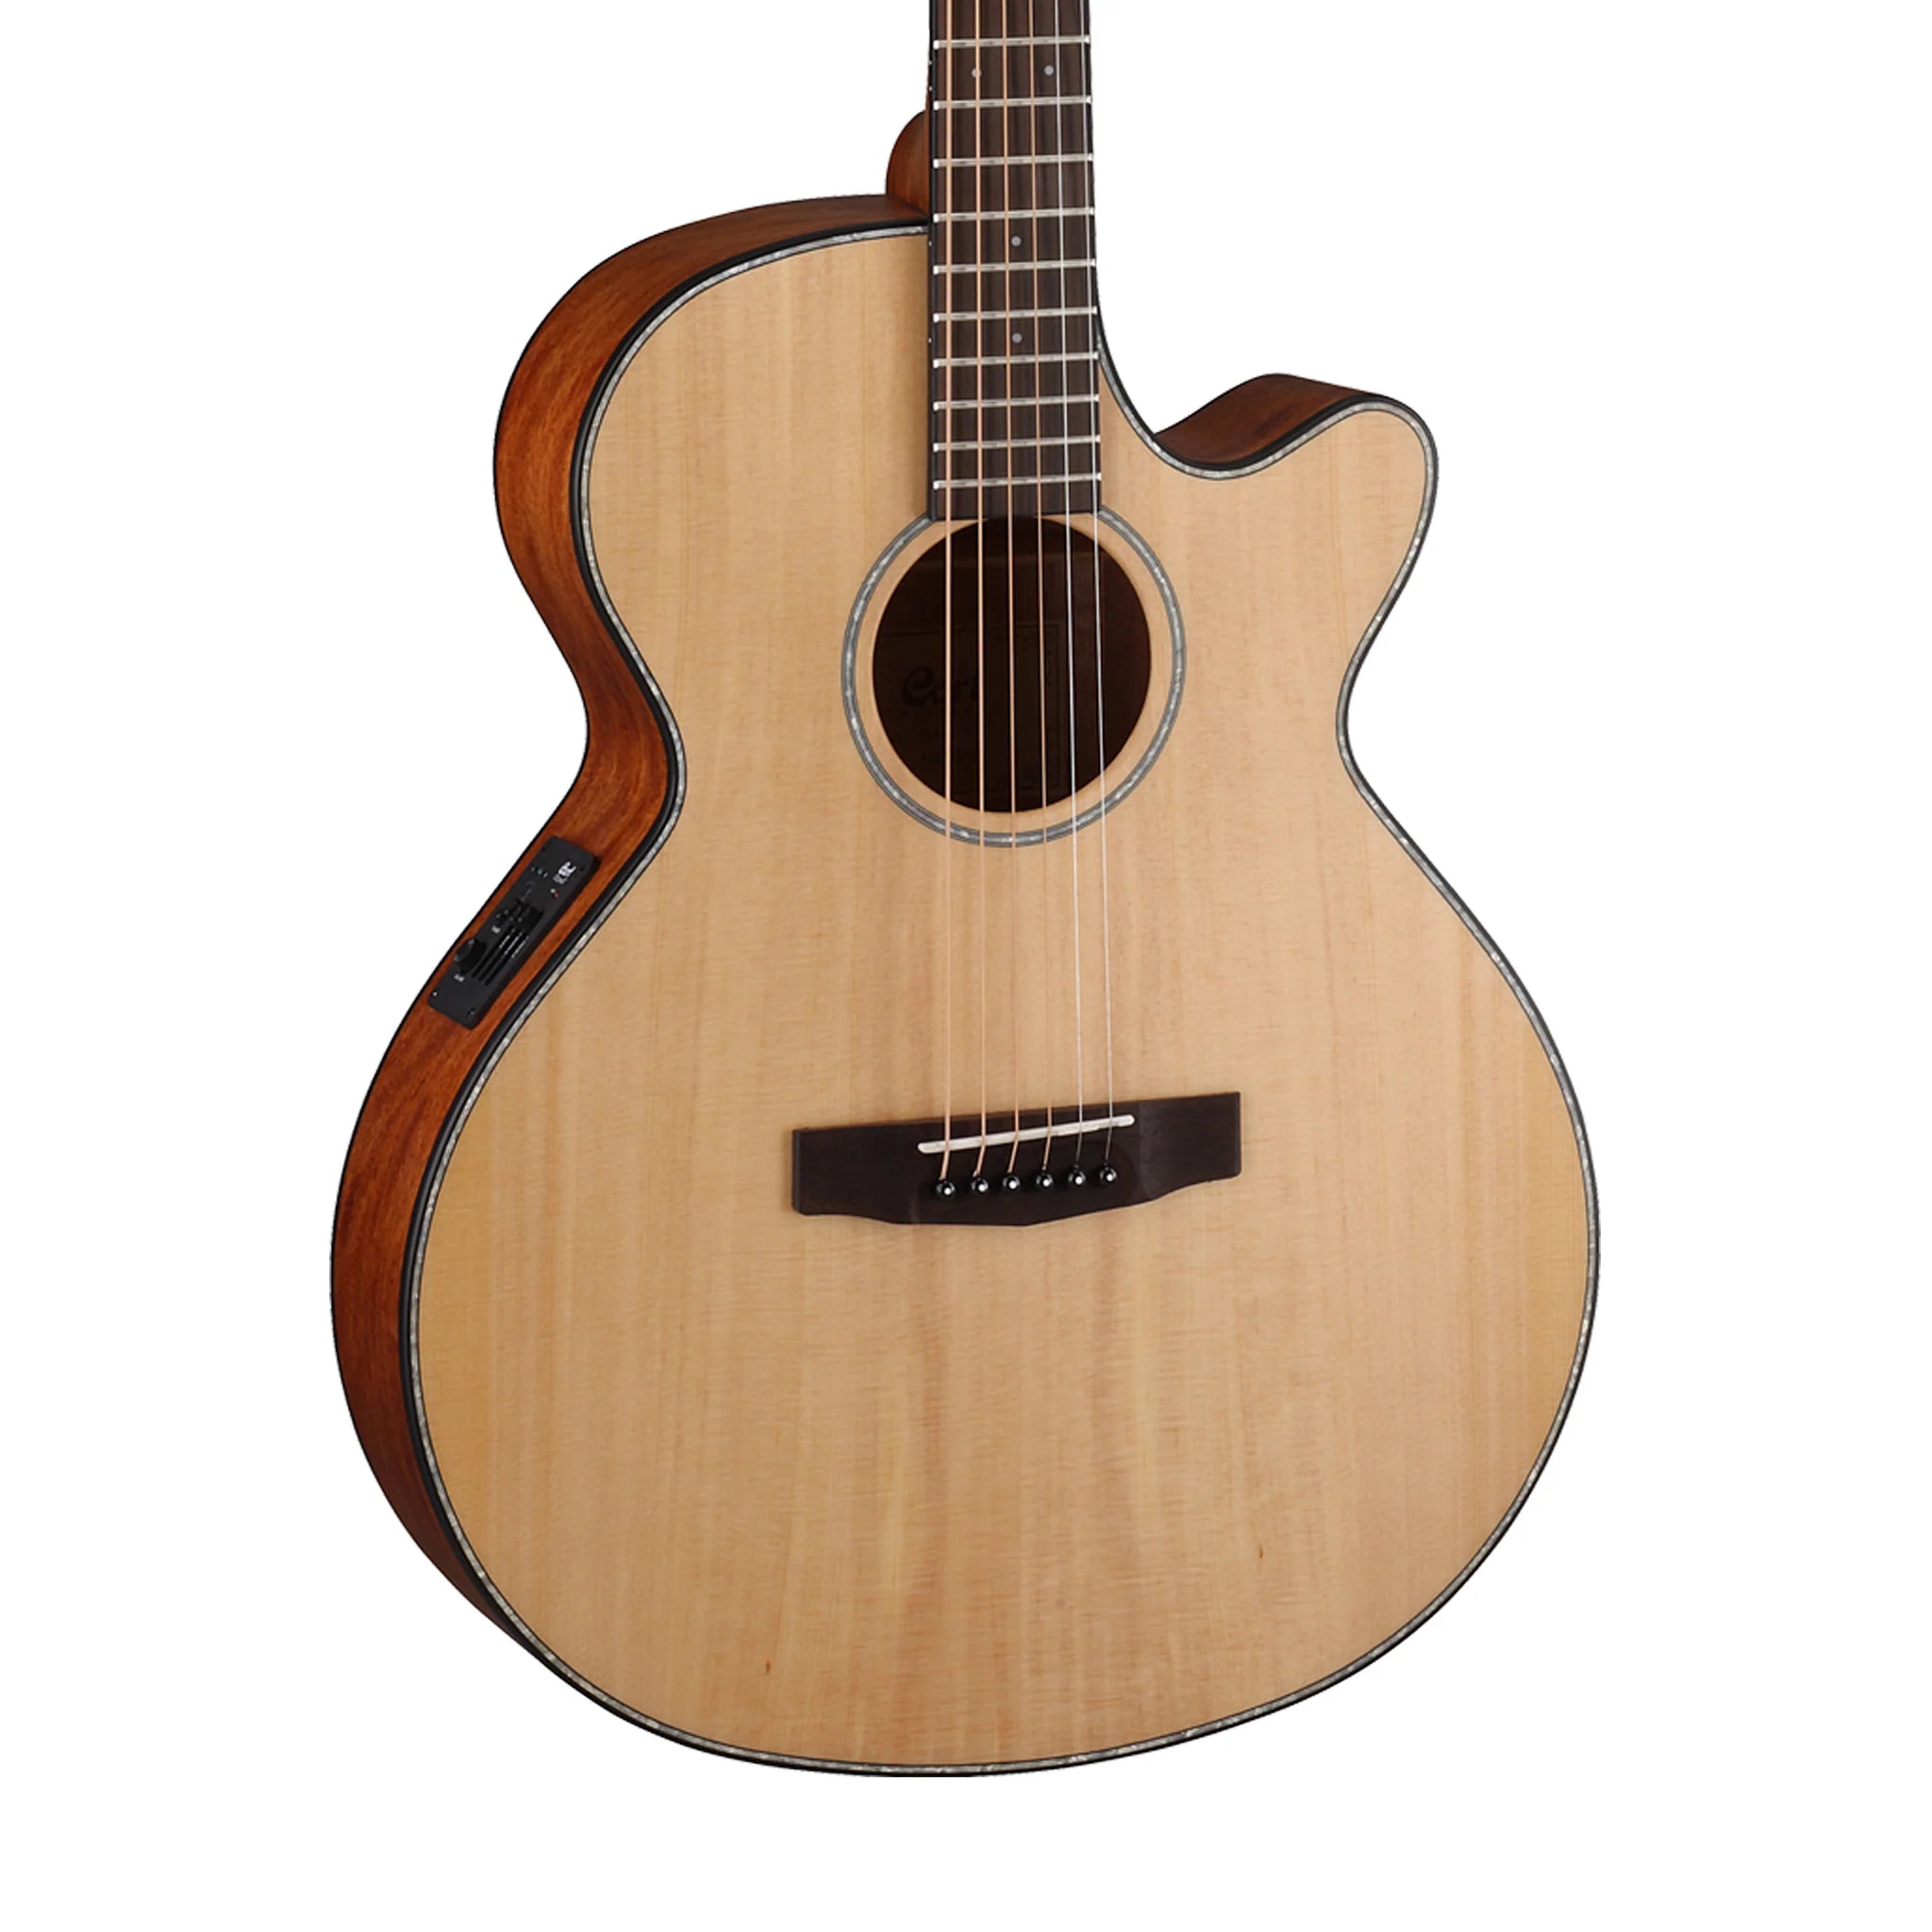 Solid Spruce Top / Mahogany Back & Sides